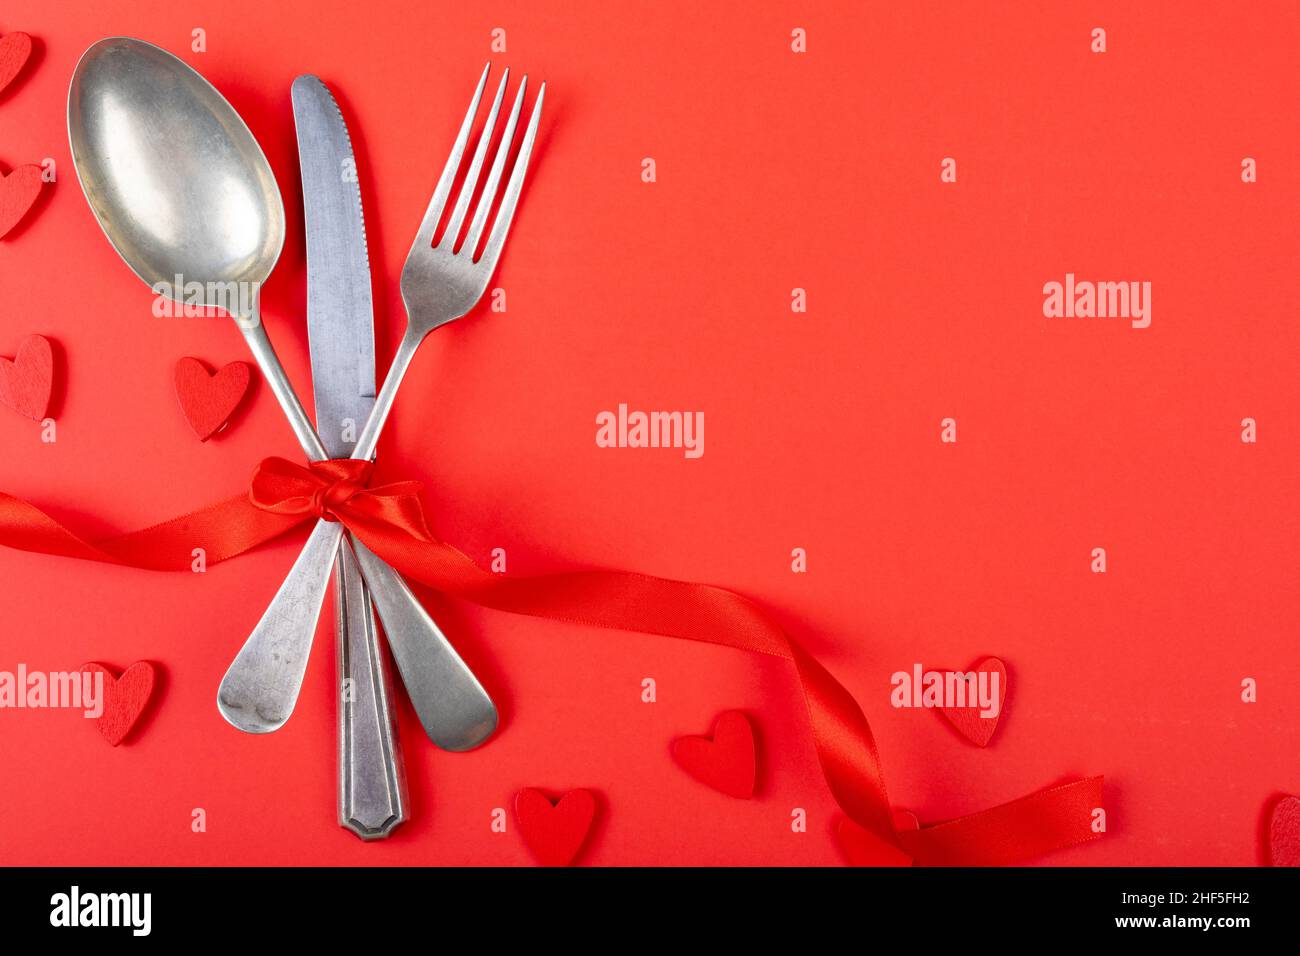 Overhead view of cutlery tied with ribbon over red background with copy space Stock Photo